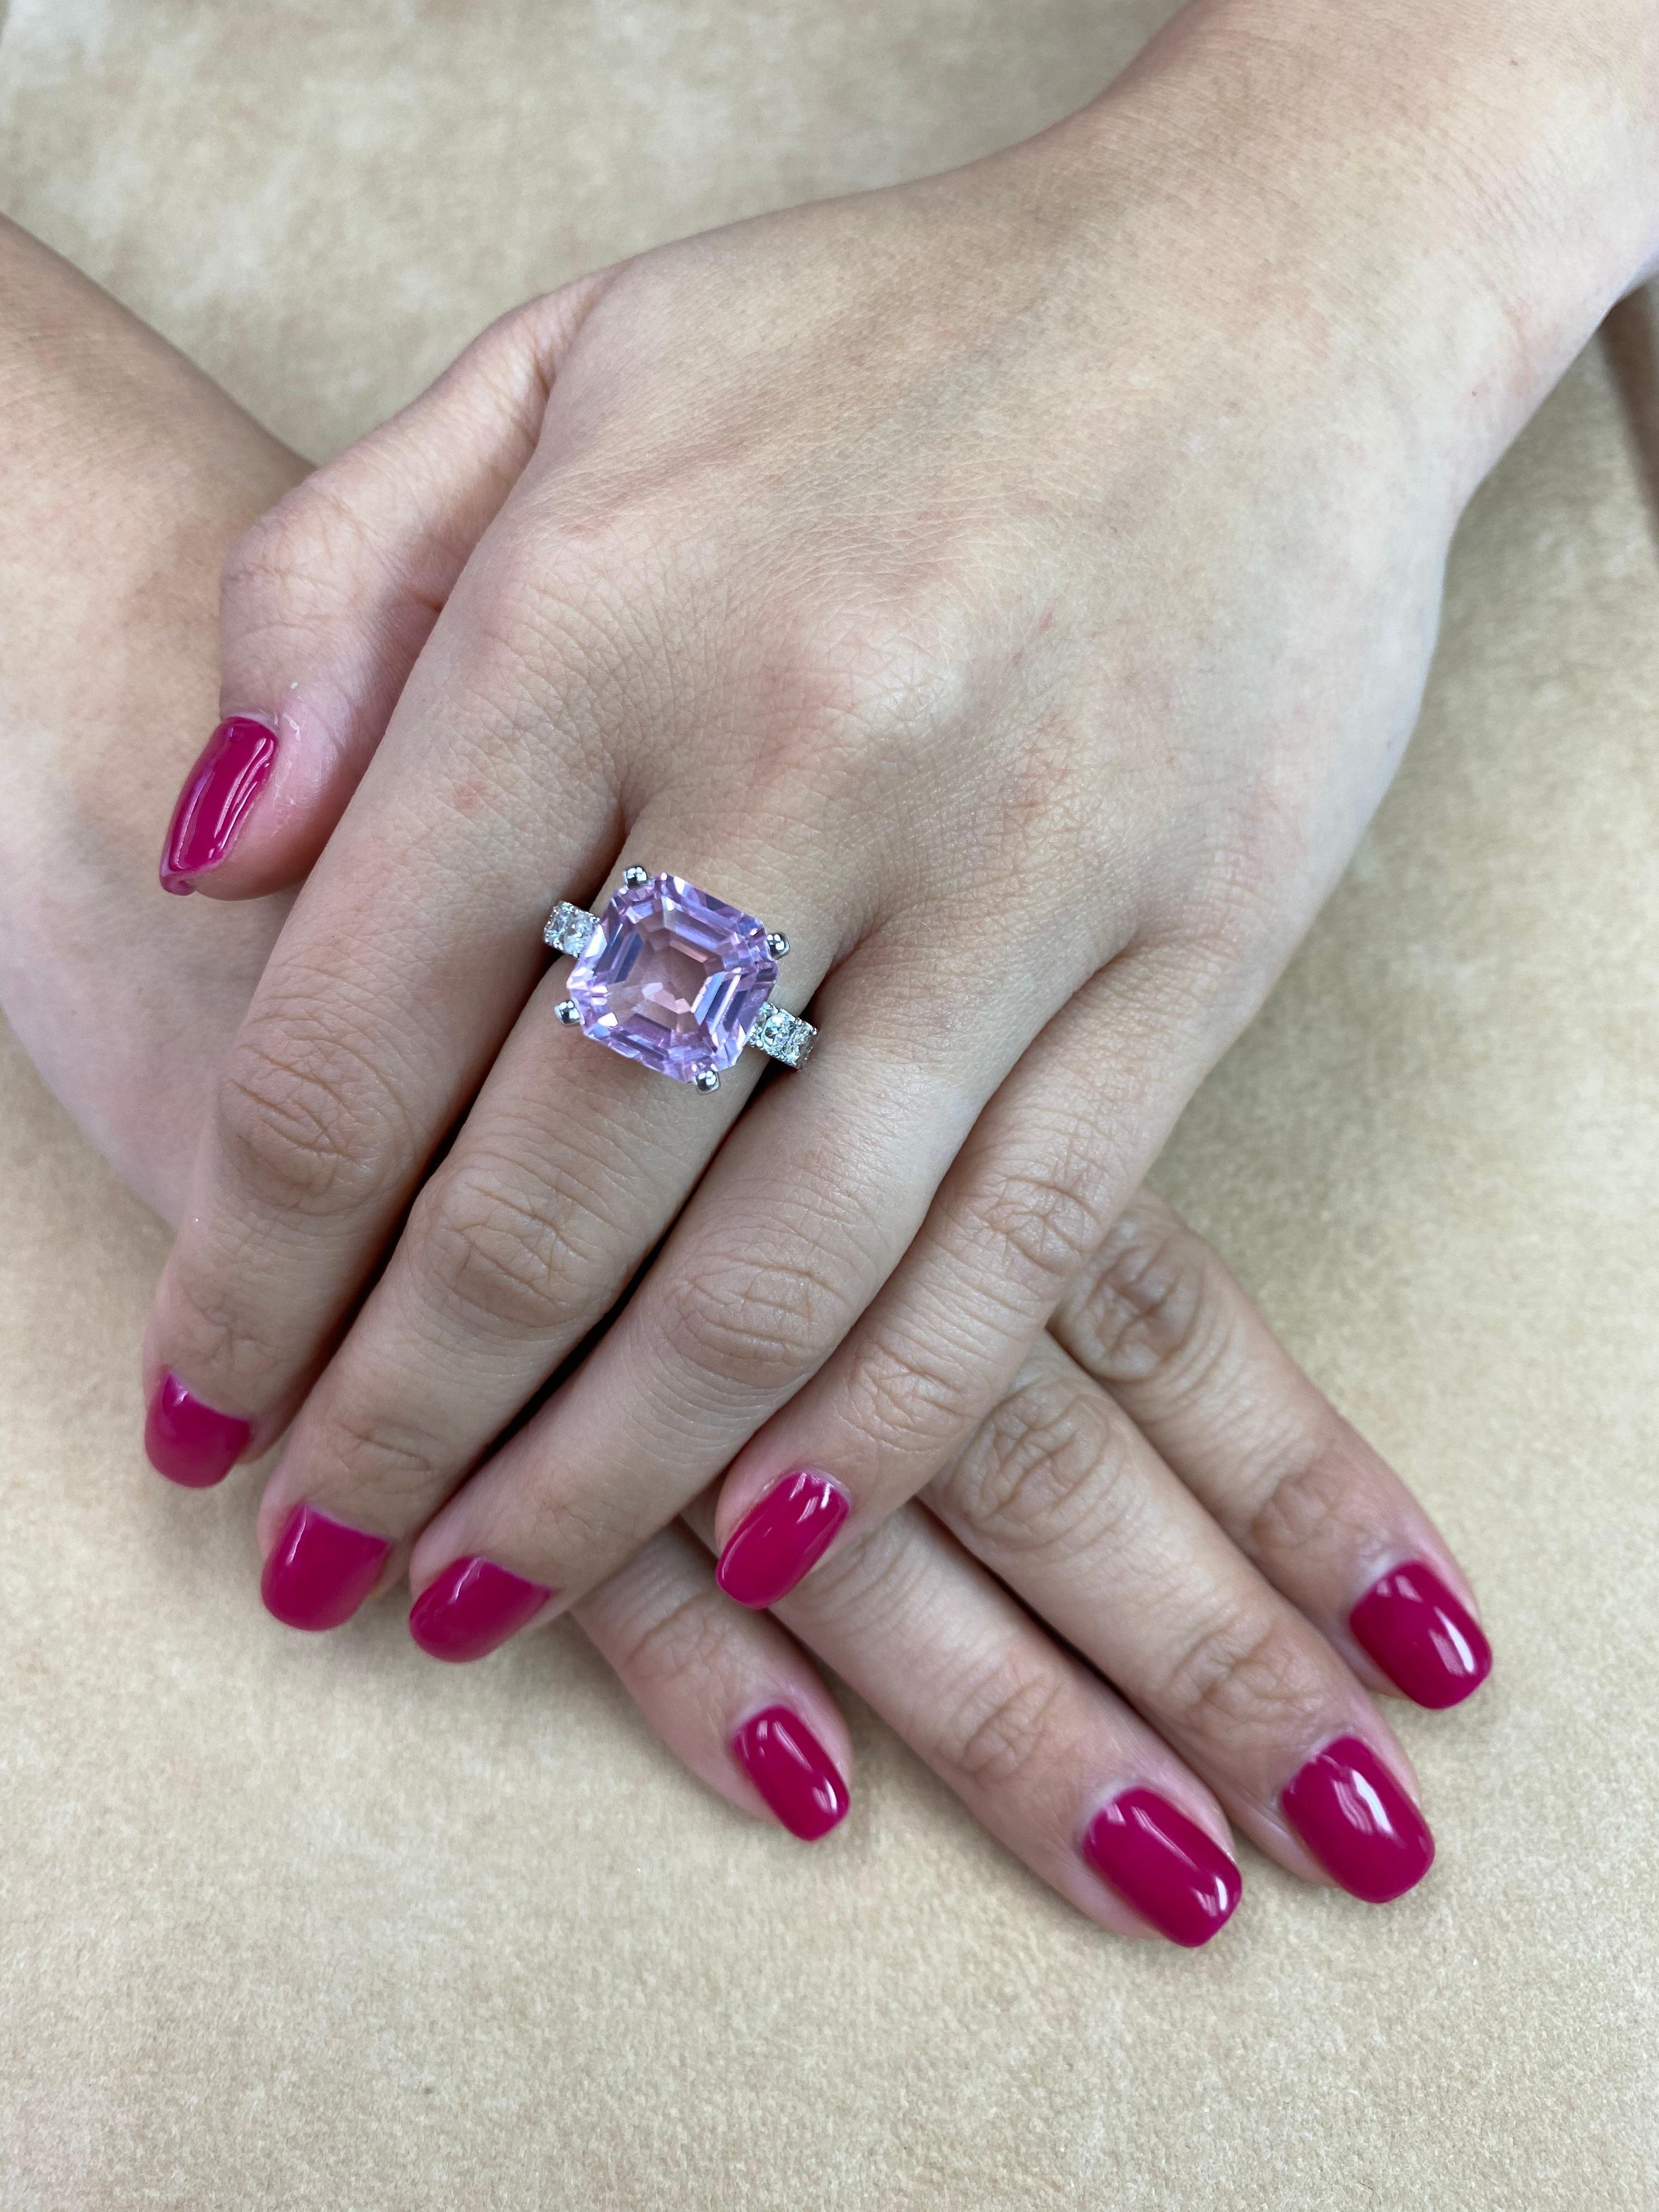 Here is a beautiful pink Kunzite and diamond cocktail ring. Oversized at 11.66 Cts. The ring is set in 18k white gold and diamonds. There are 8 diamonds totaling 0.46 cts on the shanks of the ring. The Kunzite ring is full of life. The pink color